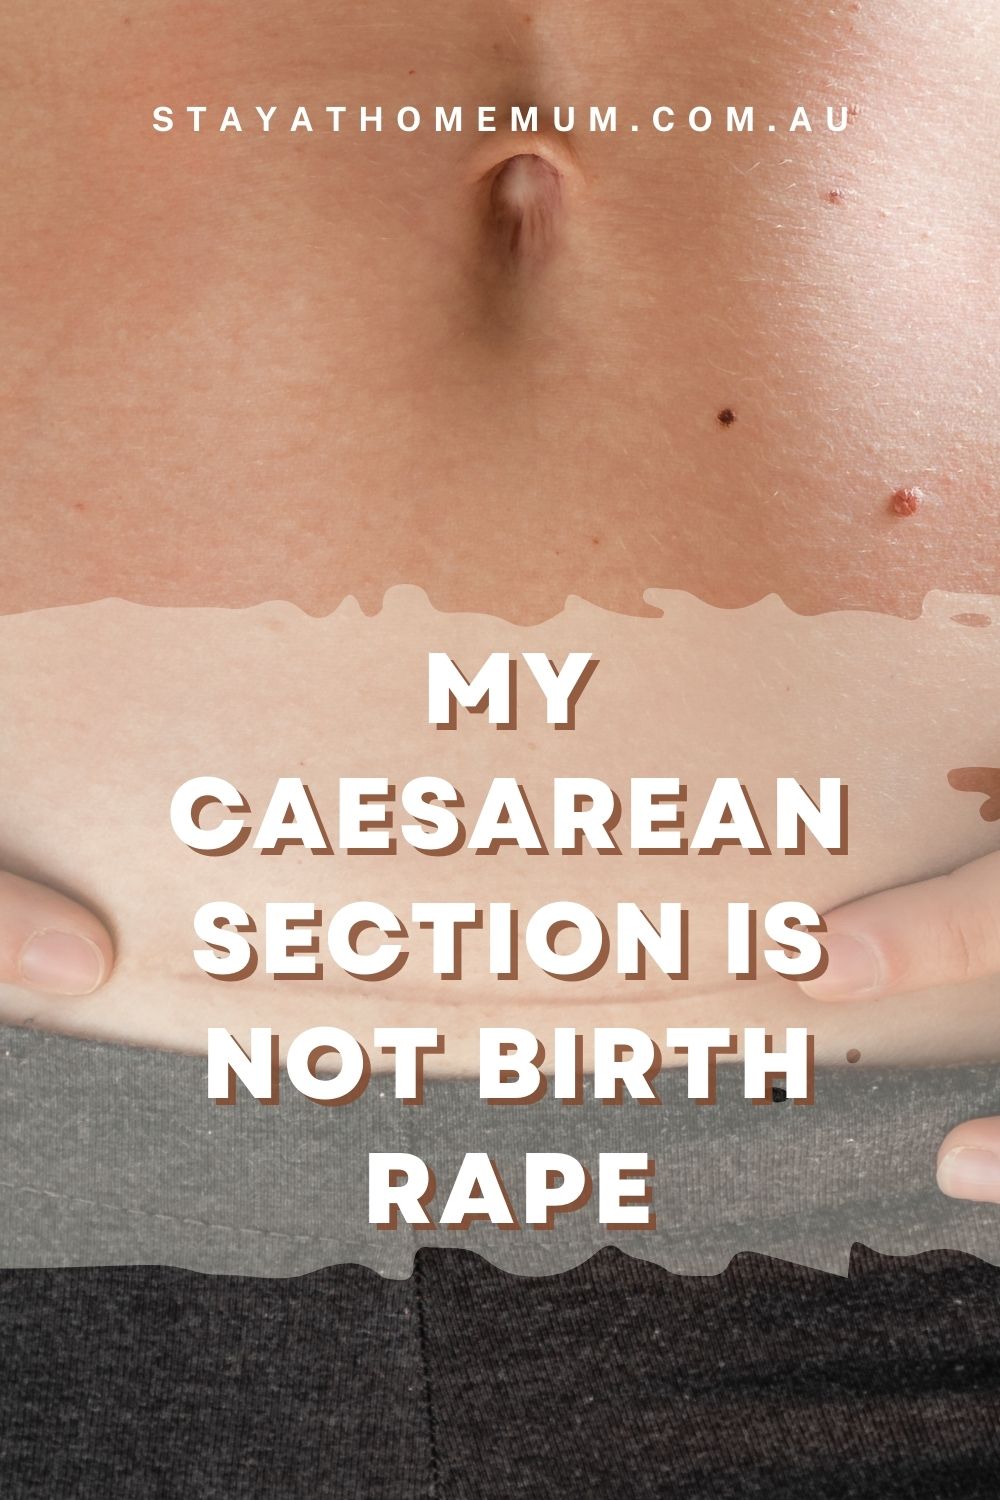 My Caesarean Section Is Not Birth Rape I Stay at Home Mum